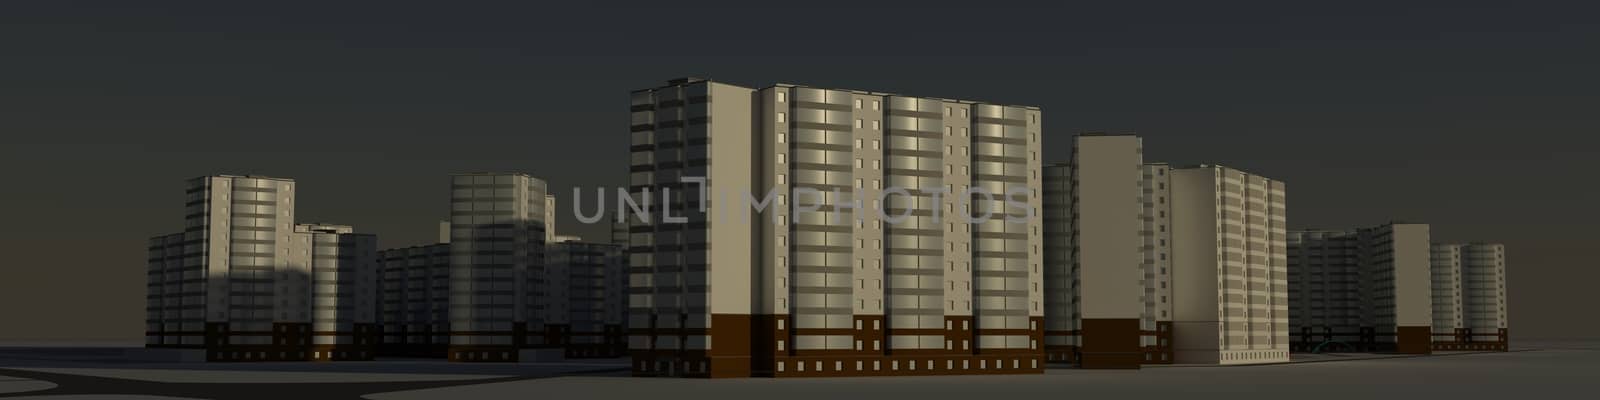 Residential district. 3d rendering against the morning sky